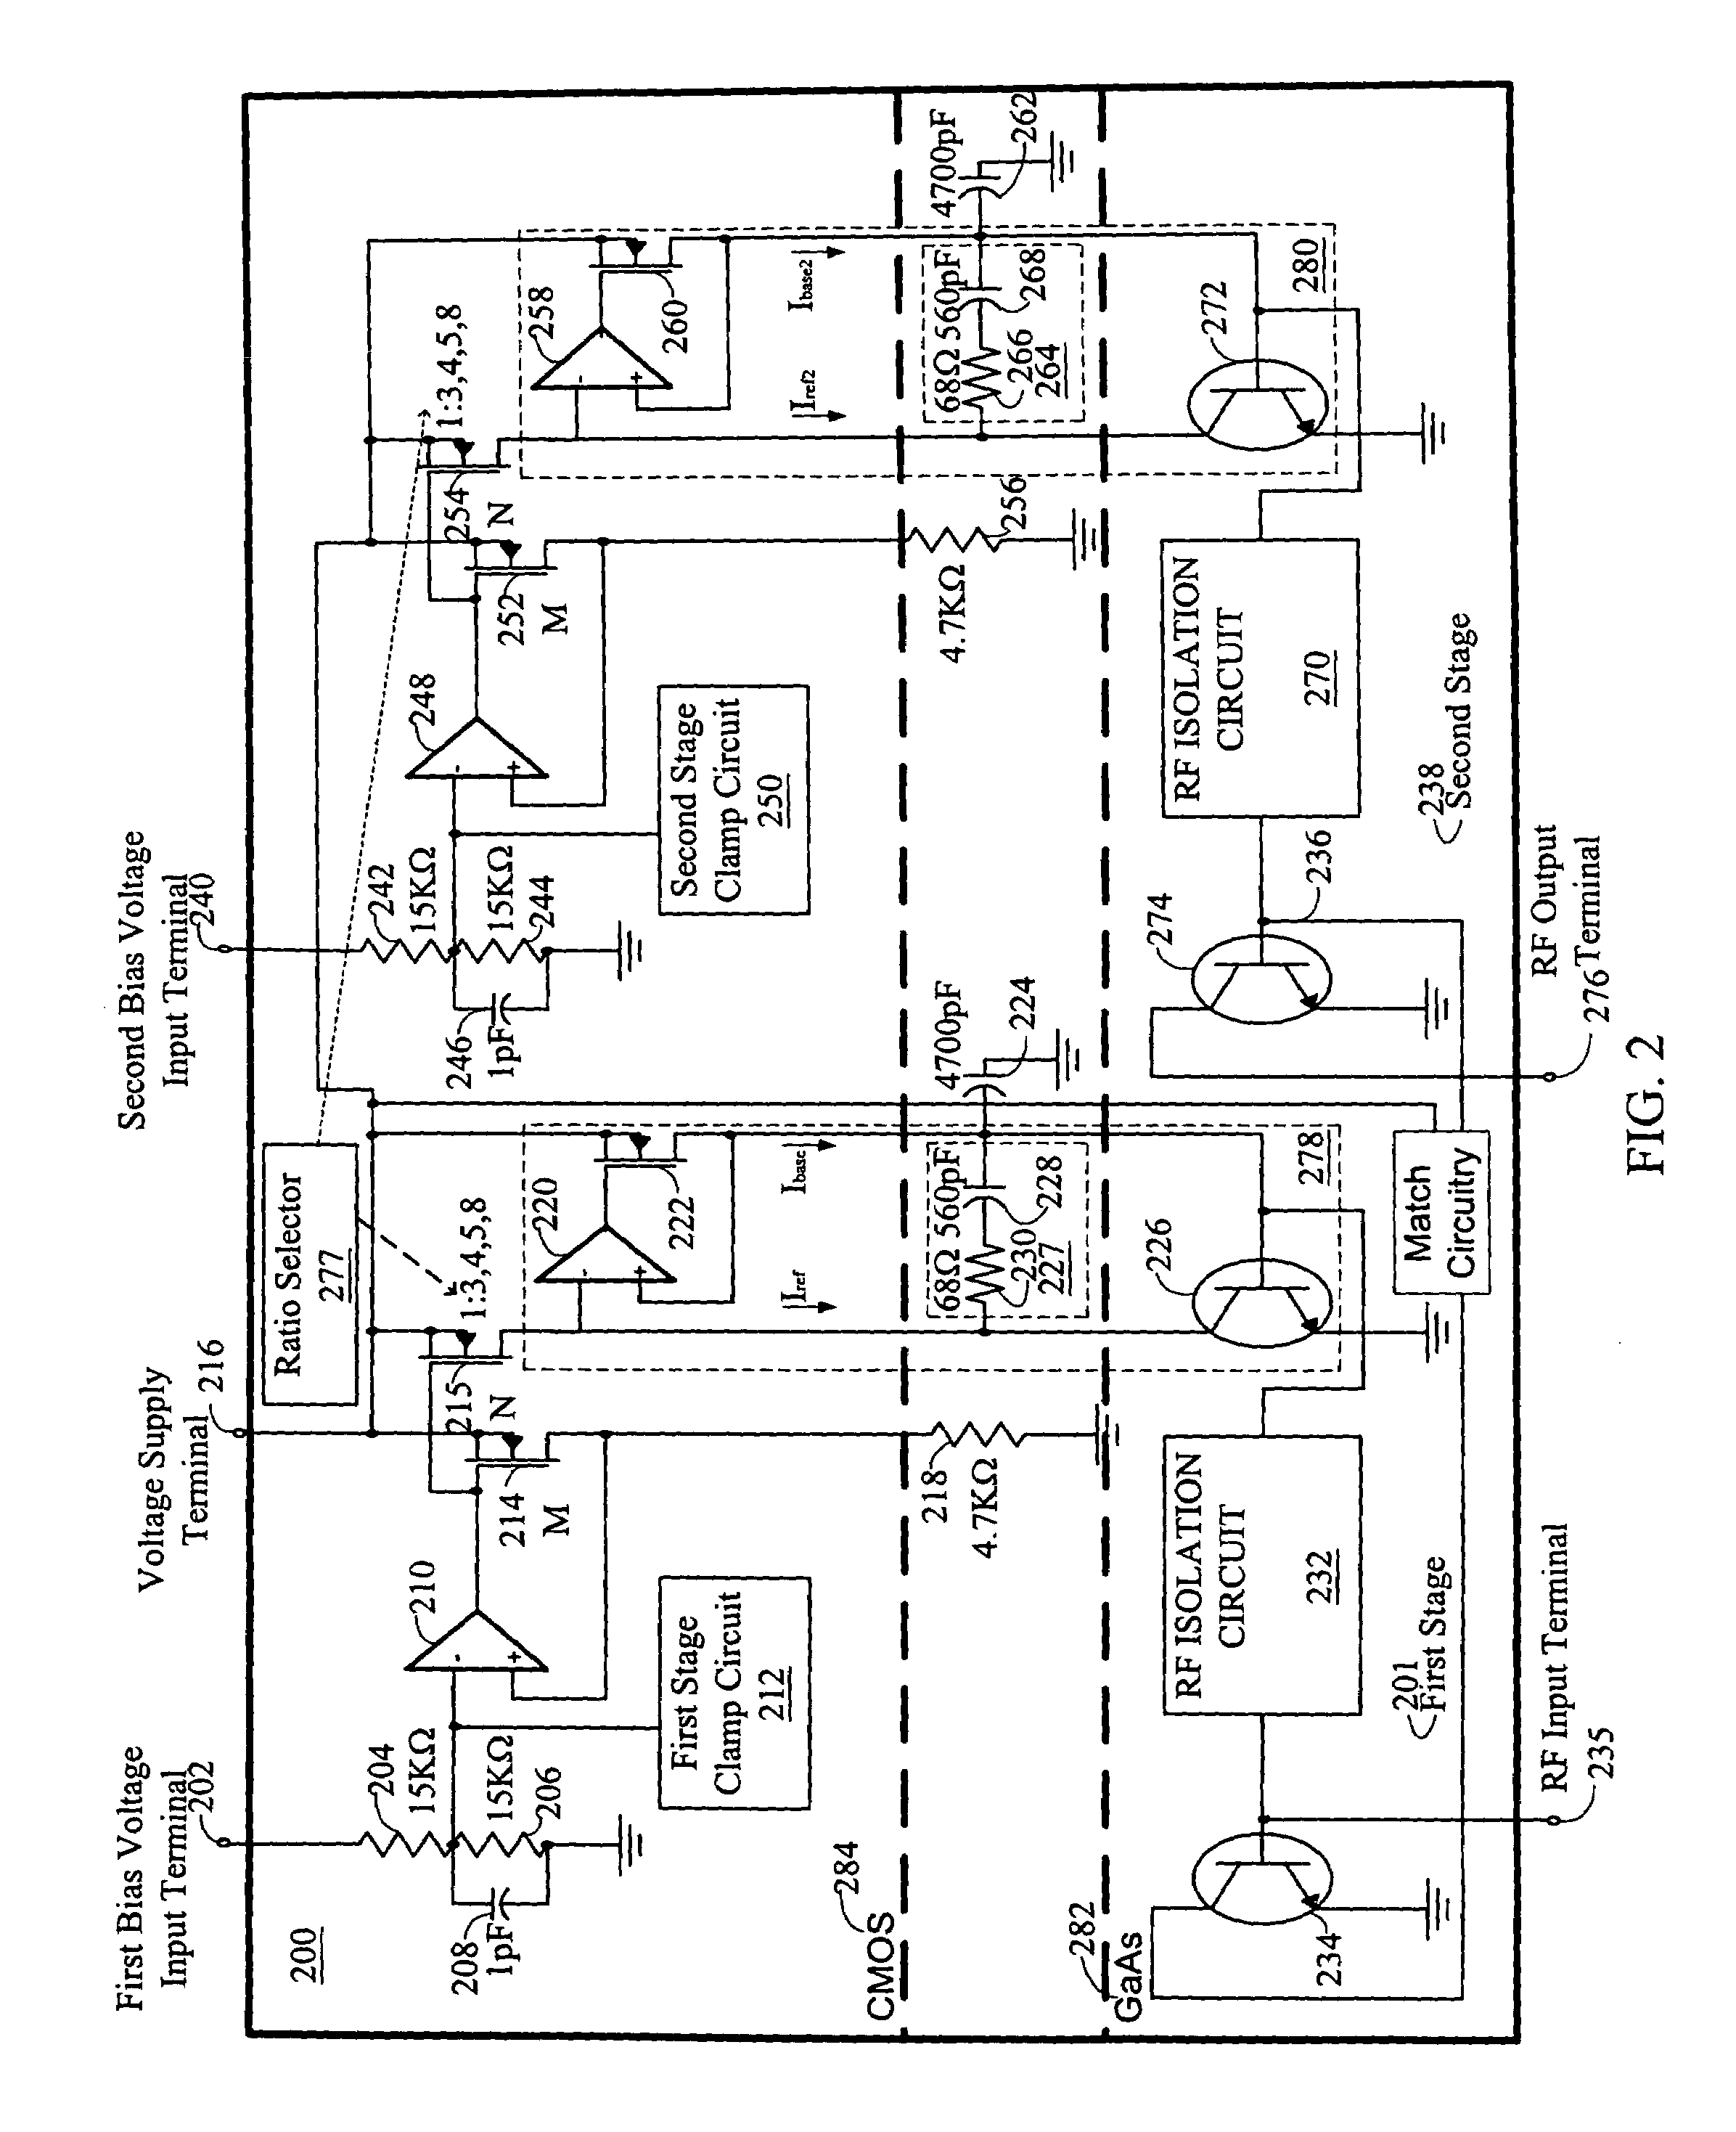 Constant current biasing circuit for linear power amplifiers